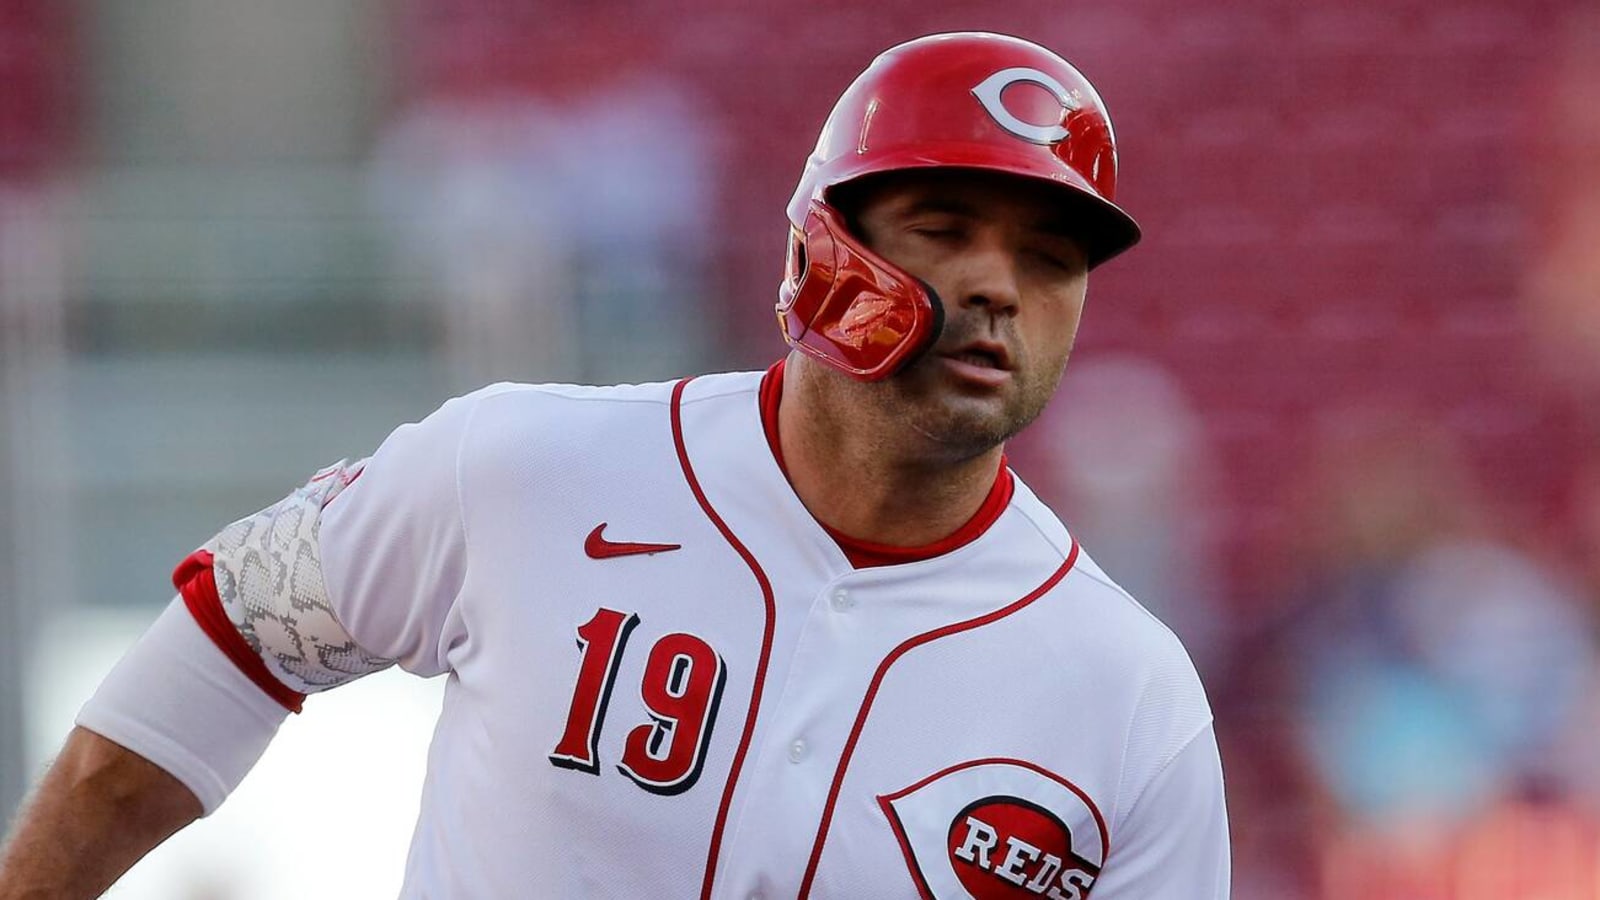 Joey Votto discusses rehab from shoulder surgery